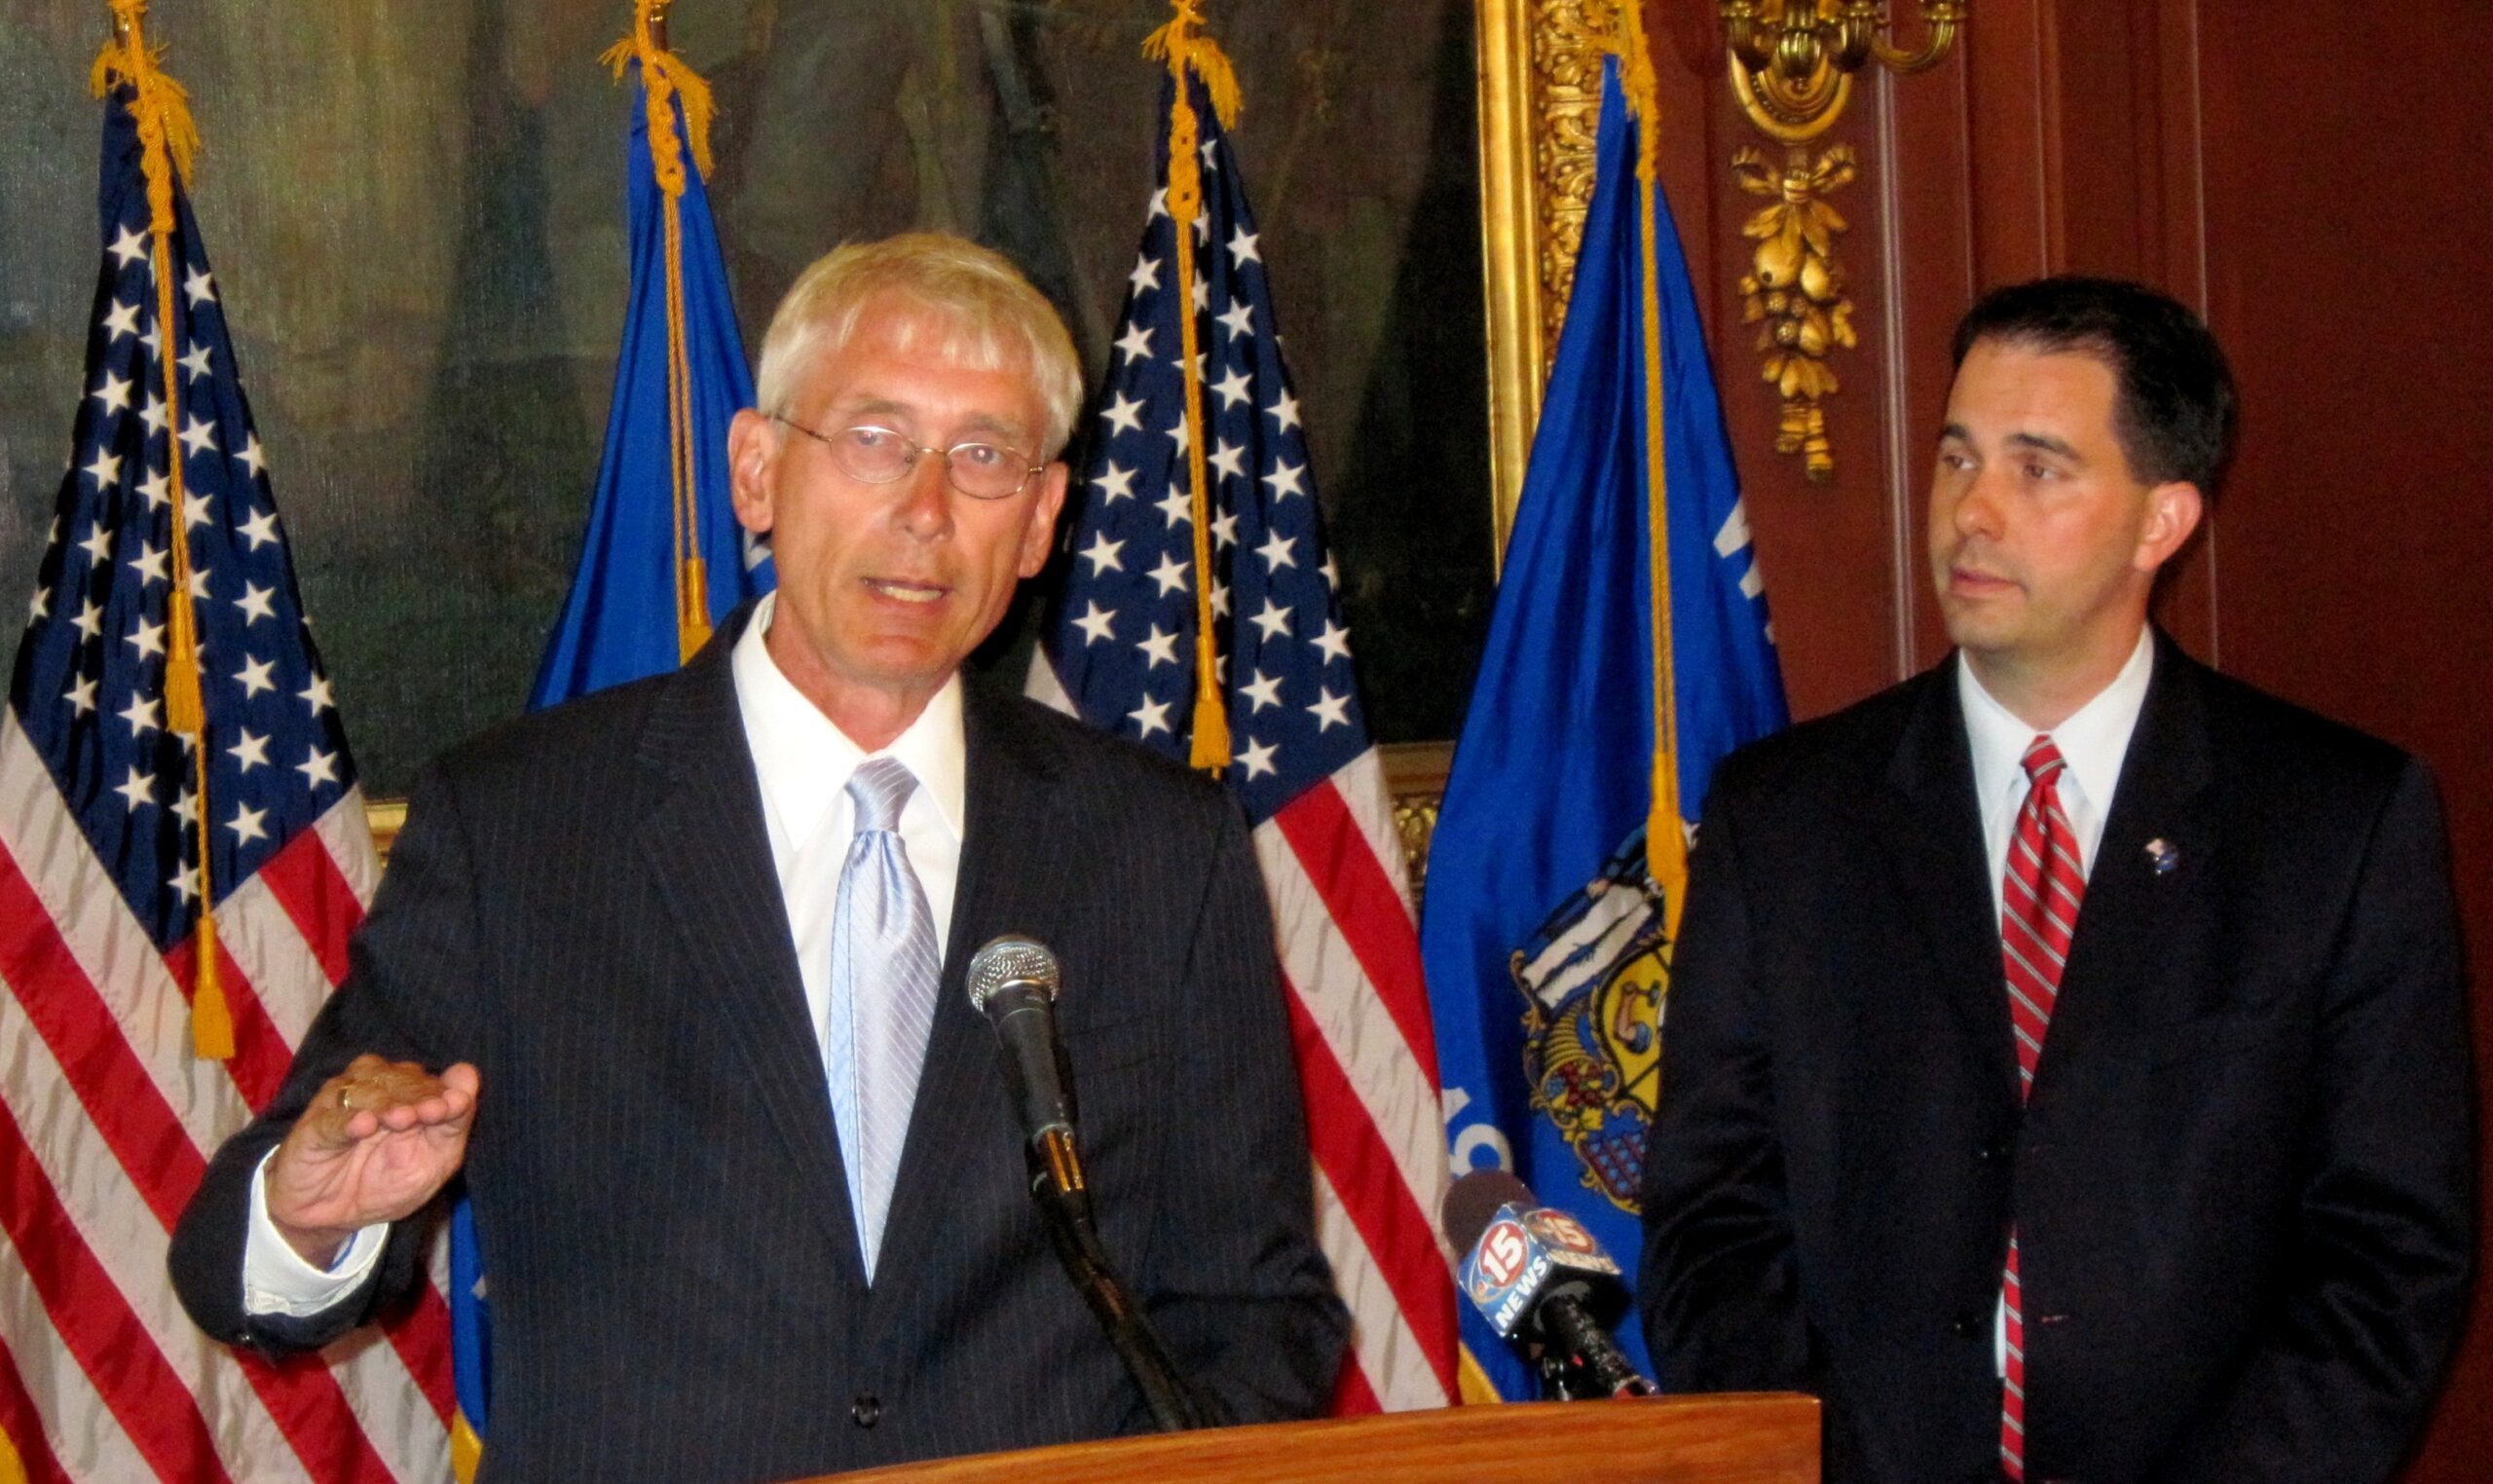 State Superintendent of Public Instruction Tony Evers and Gov. Scott Walker